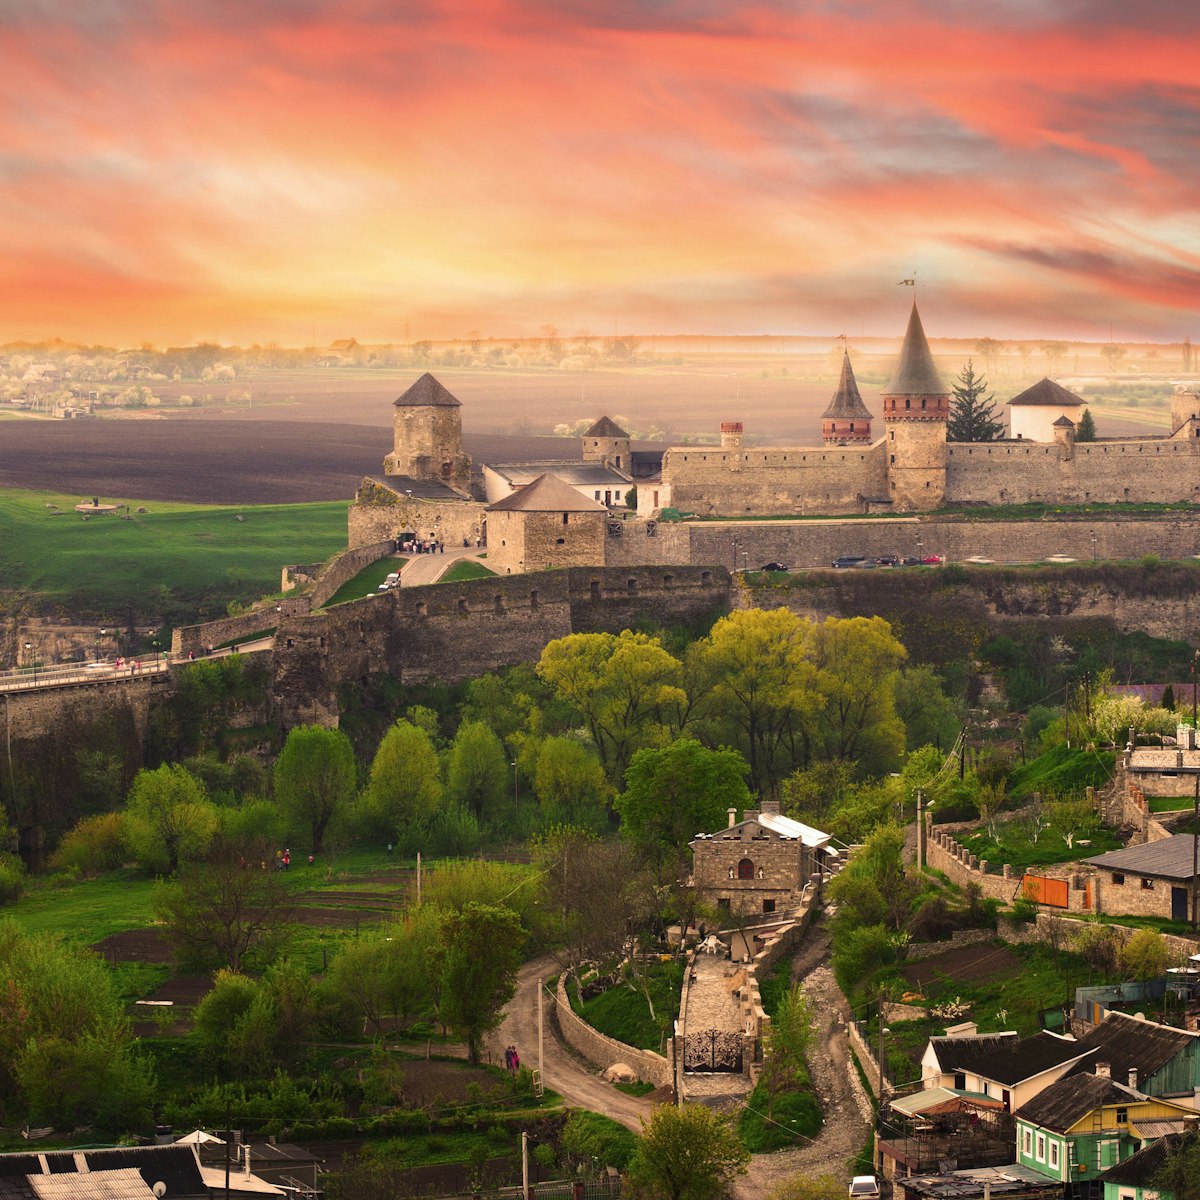 Dramatic view on the castle in Kamianets-Podilskyi in spring. Ukraine
129498389
unusual, cross, medieval, warm, historical, town, travel, view, dramatic, fortified, yellow, awesome, magic, castle, may, orange, old, turrets, evening, traditional, fantasy, multicolored, fortress, interesting, colors, ages, city, ukrainian, towers, ukraine, buildings, sky, places, beautiful, bridge, stunning, landscape, history icon, kamianets, podilskyi, kamjanets, kamenets, podilsky, kamianets-podilskyi, podolsky, kamyanets, kamyanets-podilsky